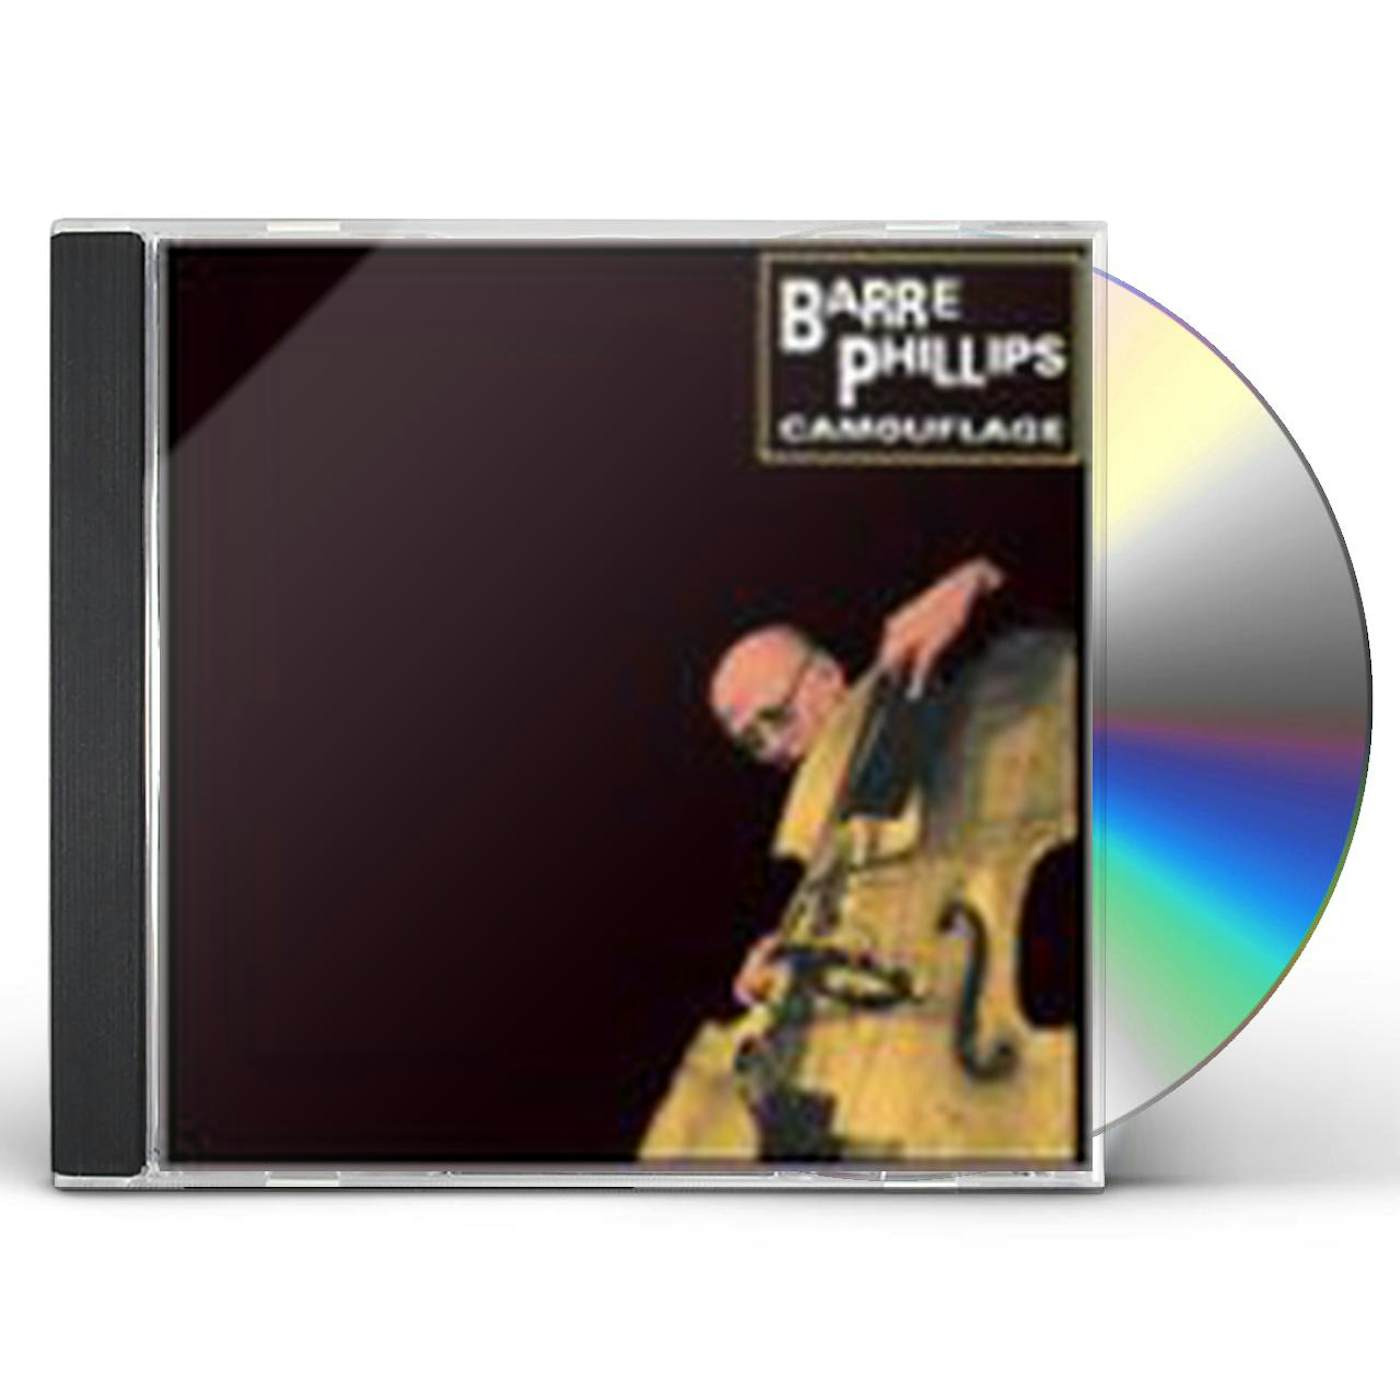 Barre Phillips CAMOUFLAGE CD